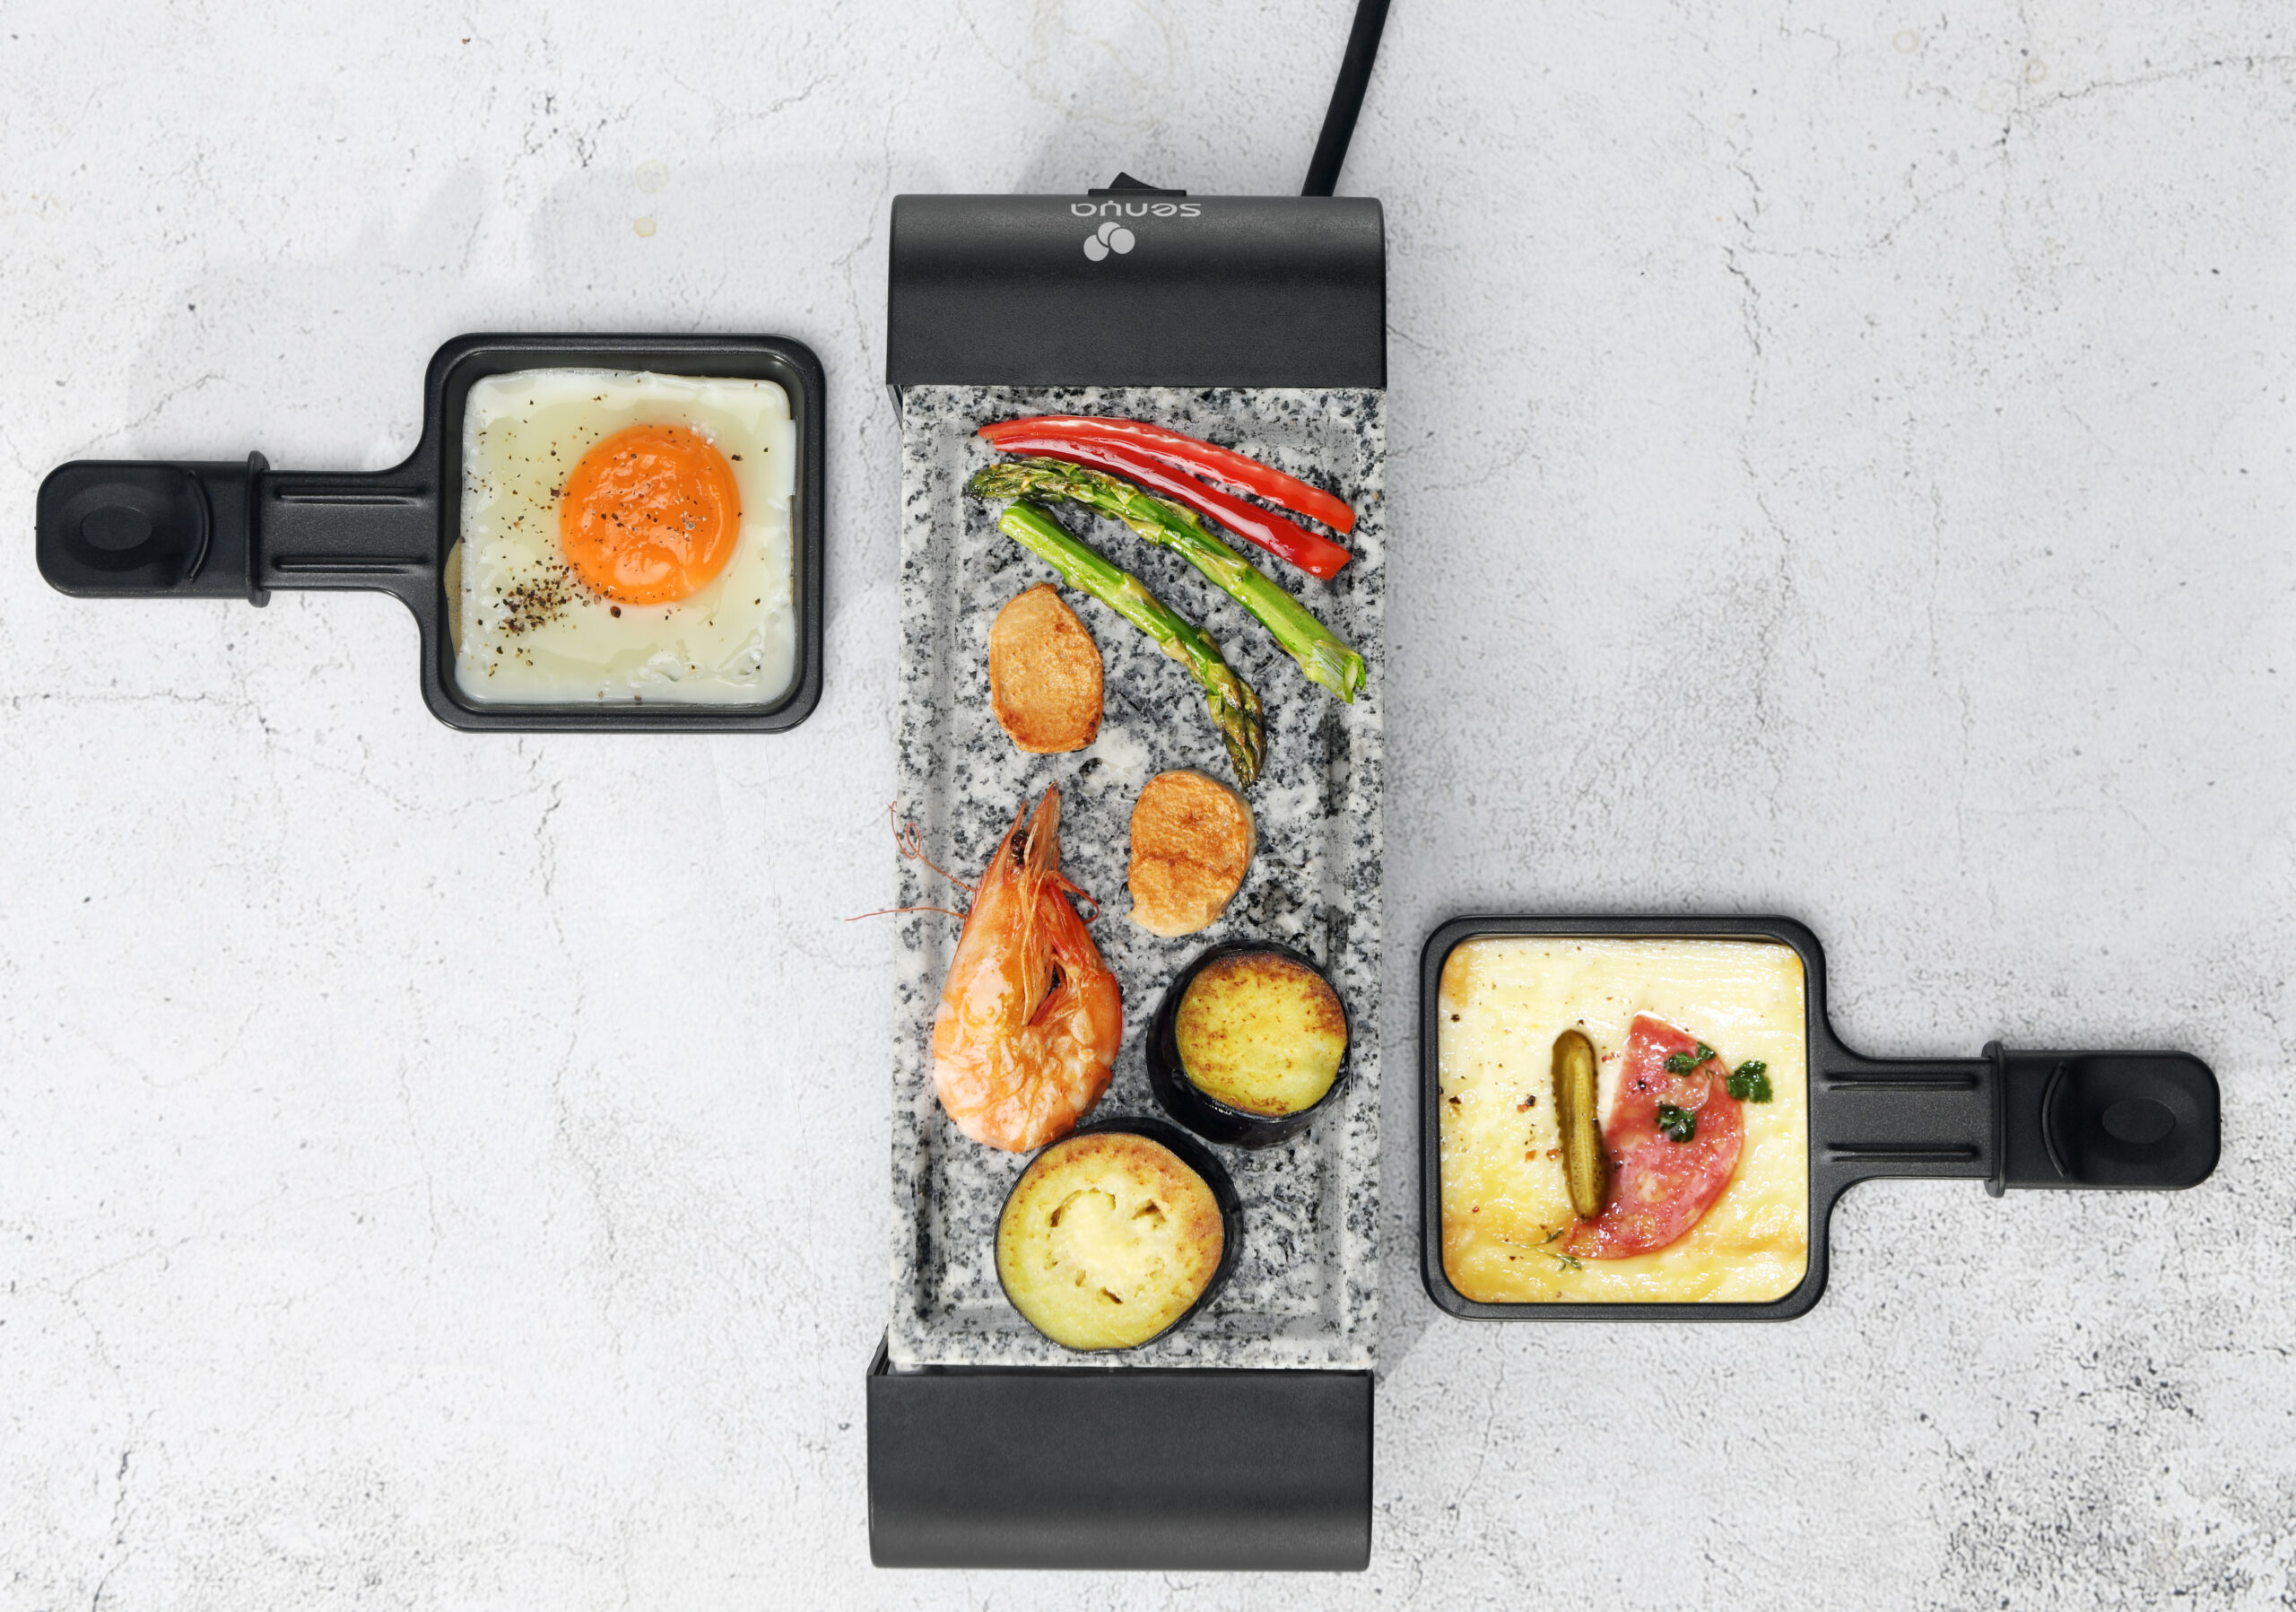 LITTLE BALANCE Cheese & Grill Party Raclette Grill Plancha, 3 en 1